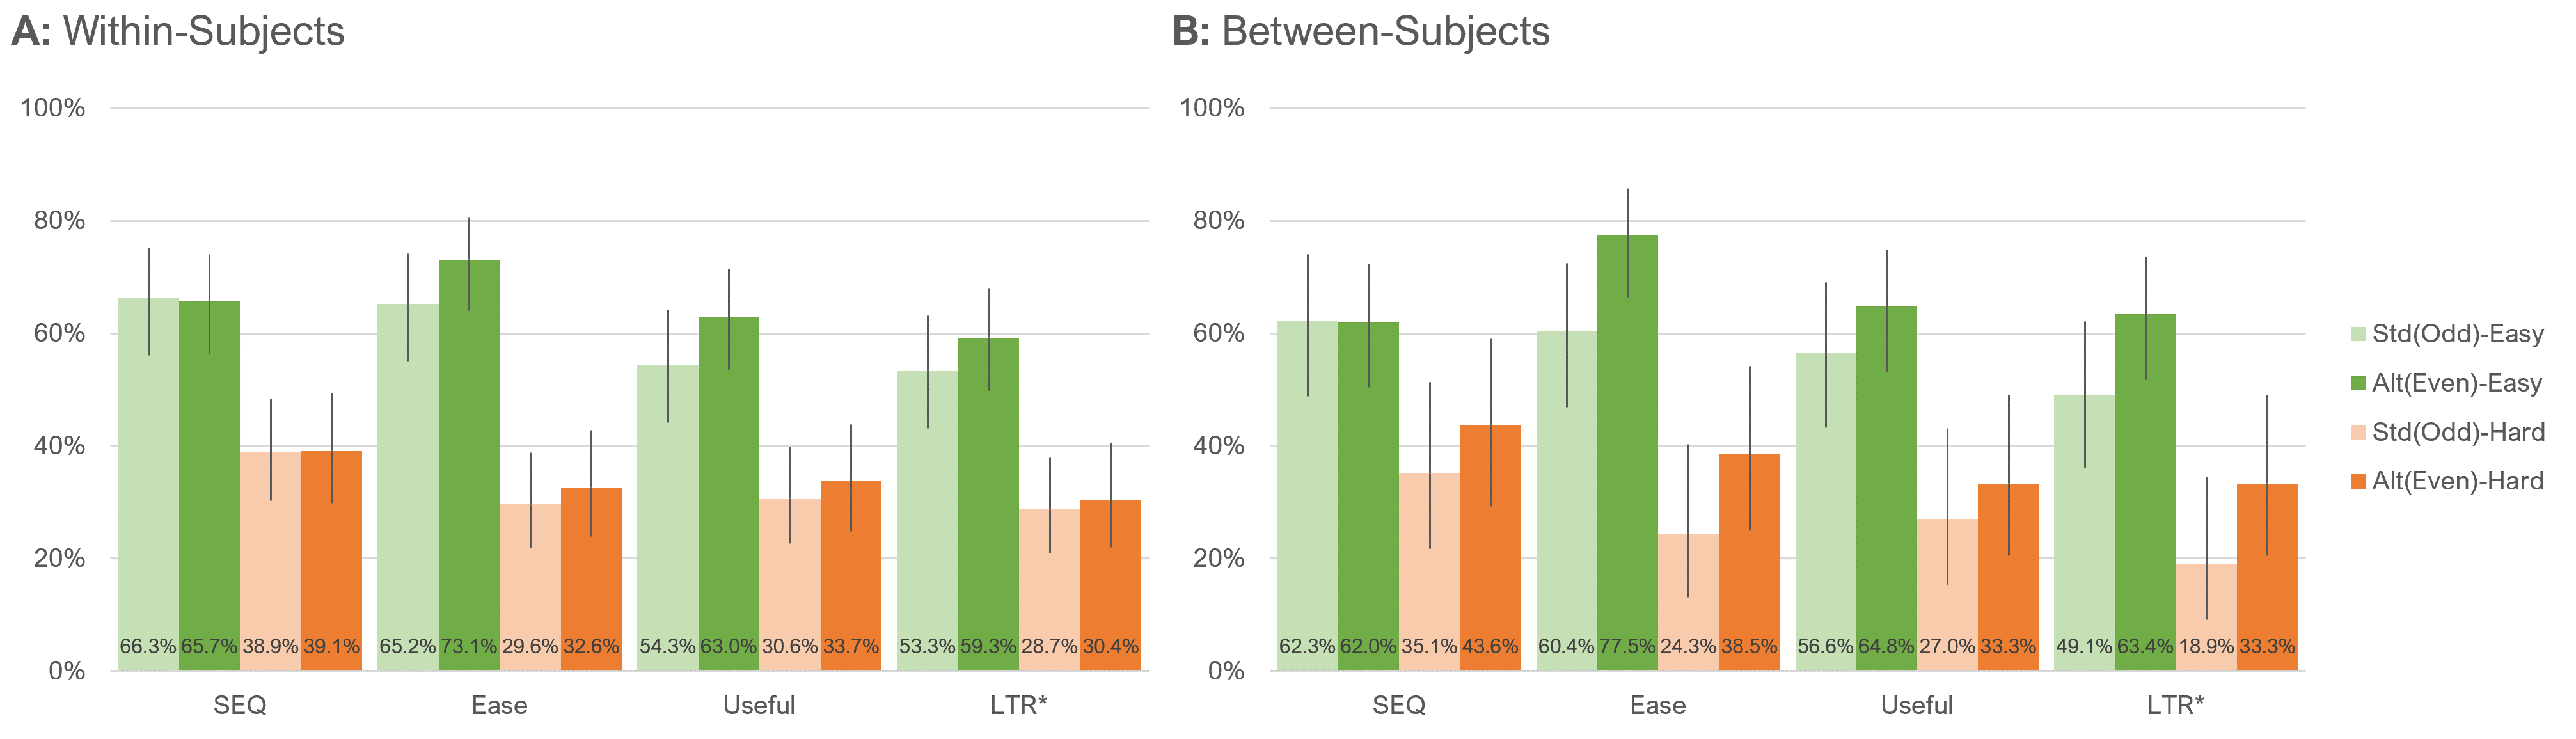 Figure 6: Within- and between-subjects differences in top-box scores as a function of item format by task difficulty with 95% confidence intervals (* = top-two-box score for the 11-point LTR item).